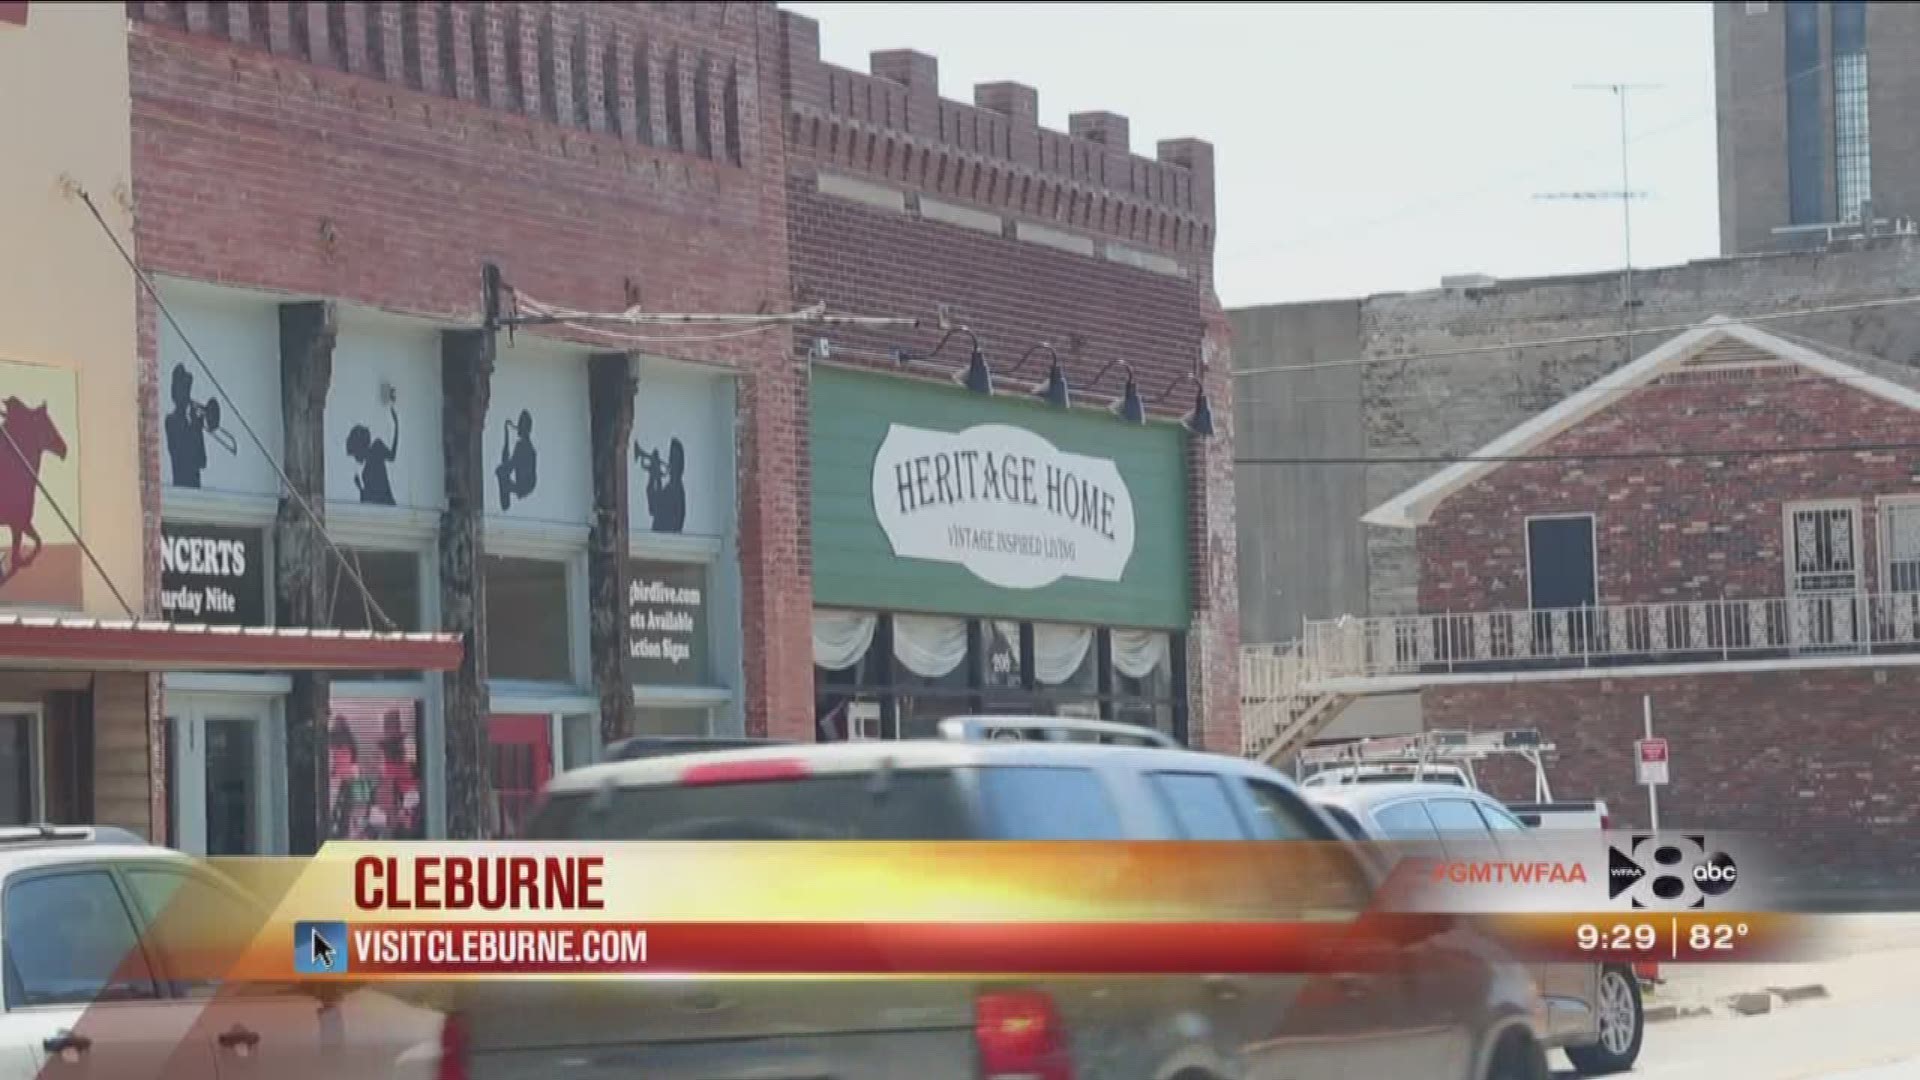 Head to Cleburne for a Summer Getaway. For more information go to visitcleburne.com. 